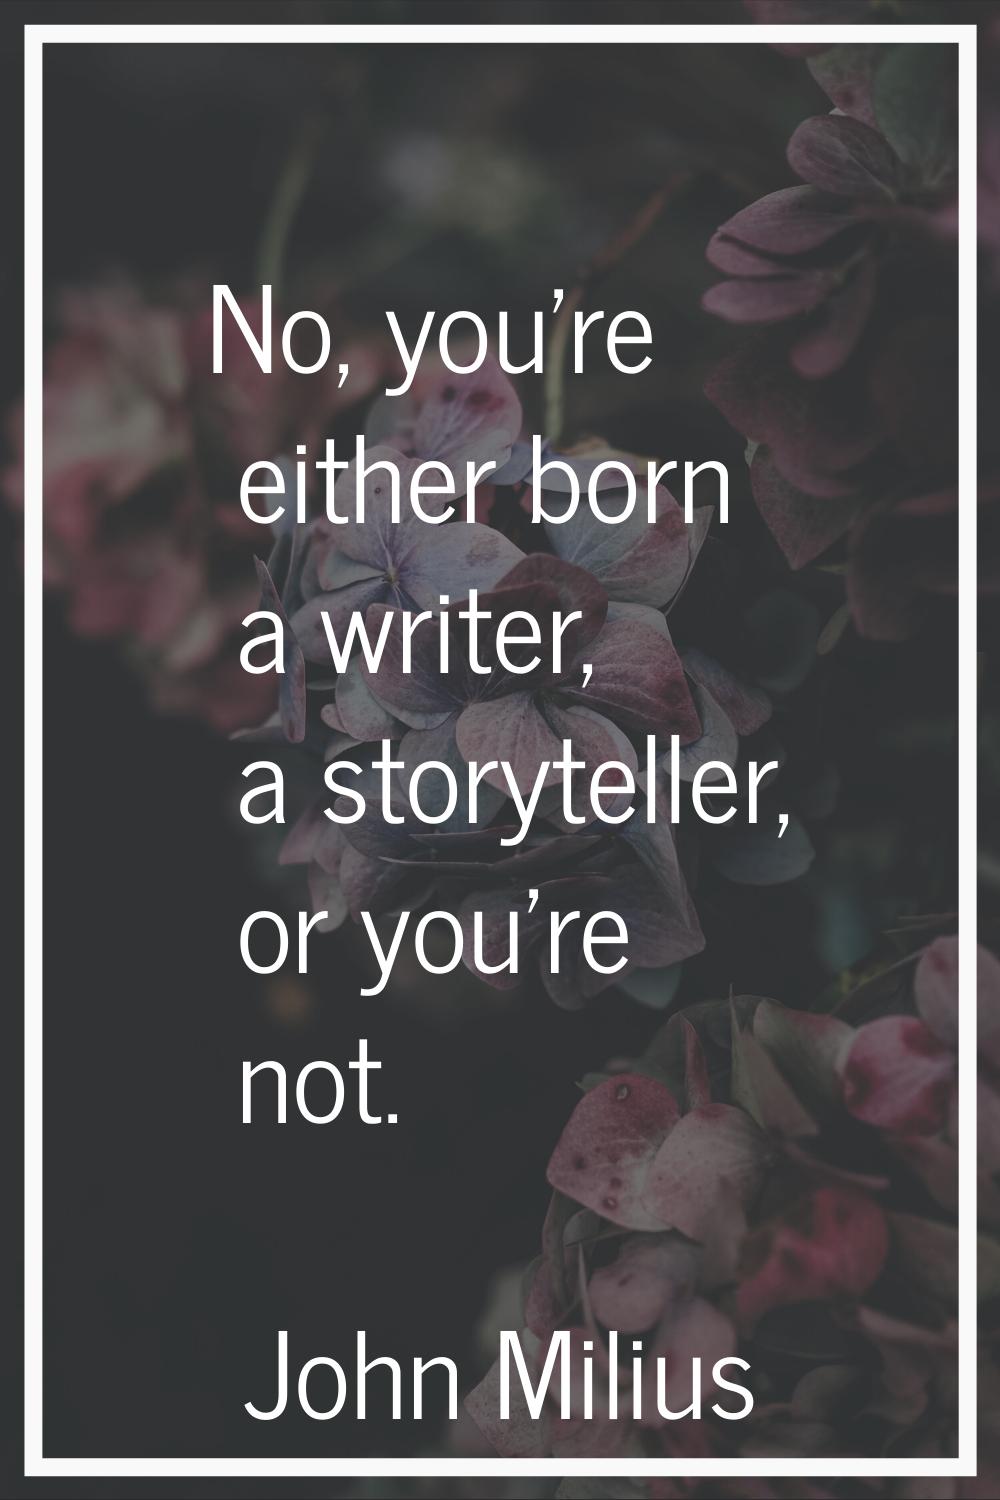 No, you're either born a writer, a storyteller, or you're not.